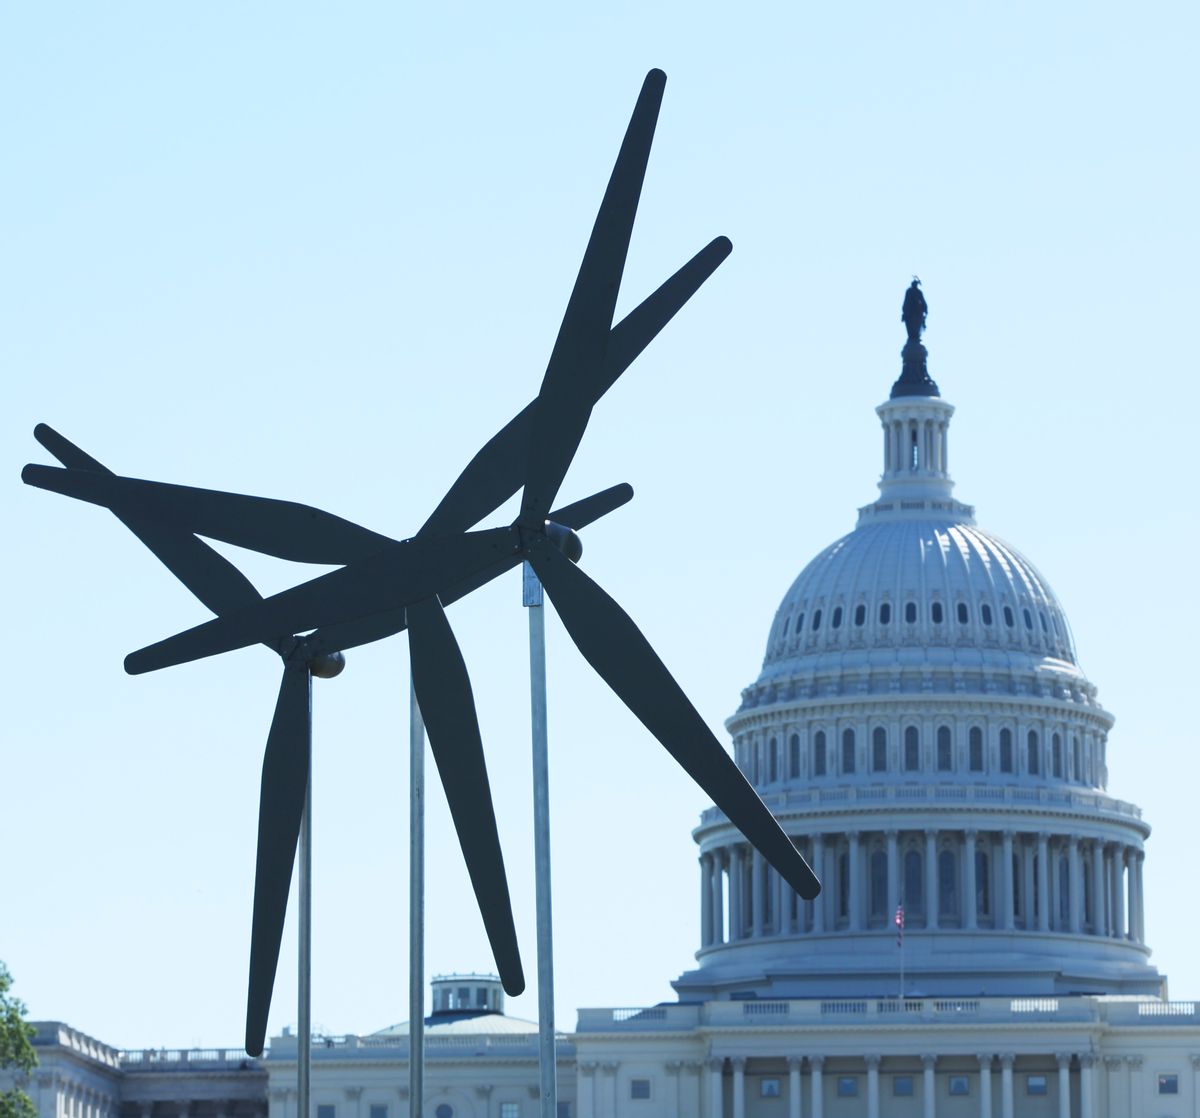 Windmills replicas to symbolize clean energy, erected by Greenpeace are seen near the Capitol in Washington, Wednesday, May 5, 2010,  to protest the oil spill in the Gulf and call on President Barack Obama and the Congress to stop plans for any new offshore drilling.   (AP Photo/Manuel Balce Ceneta)  (Associated Press)